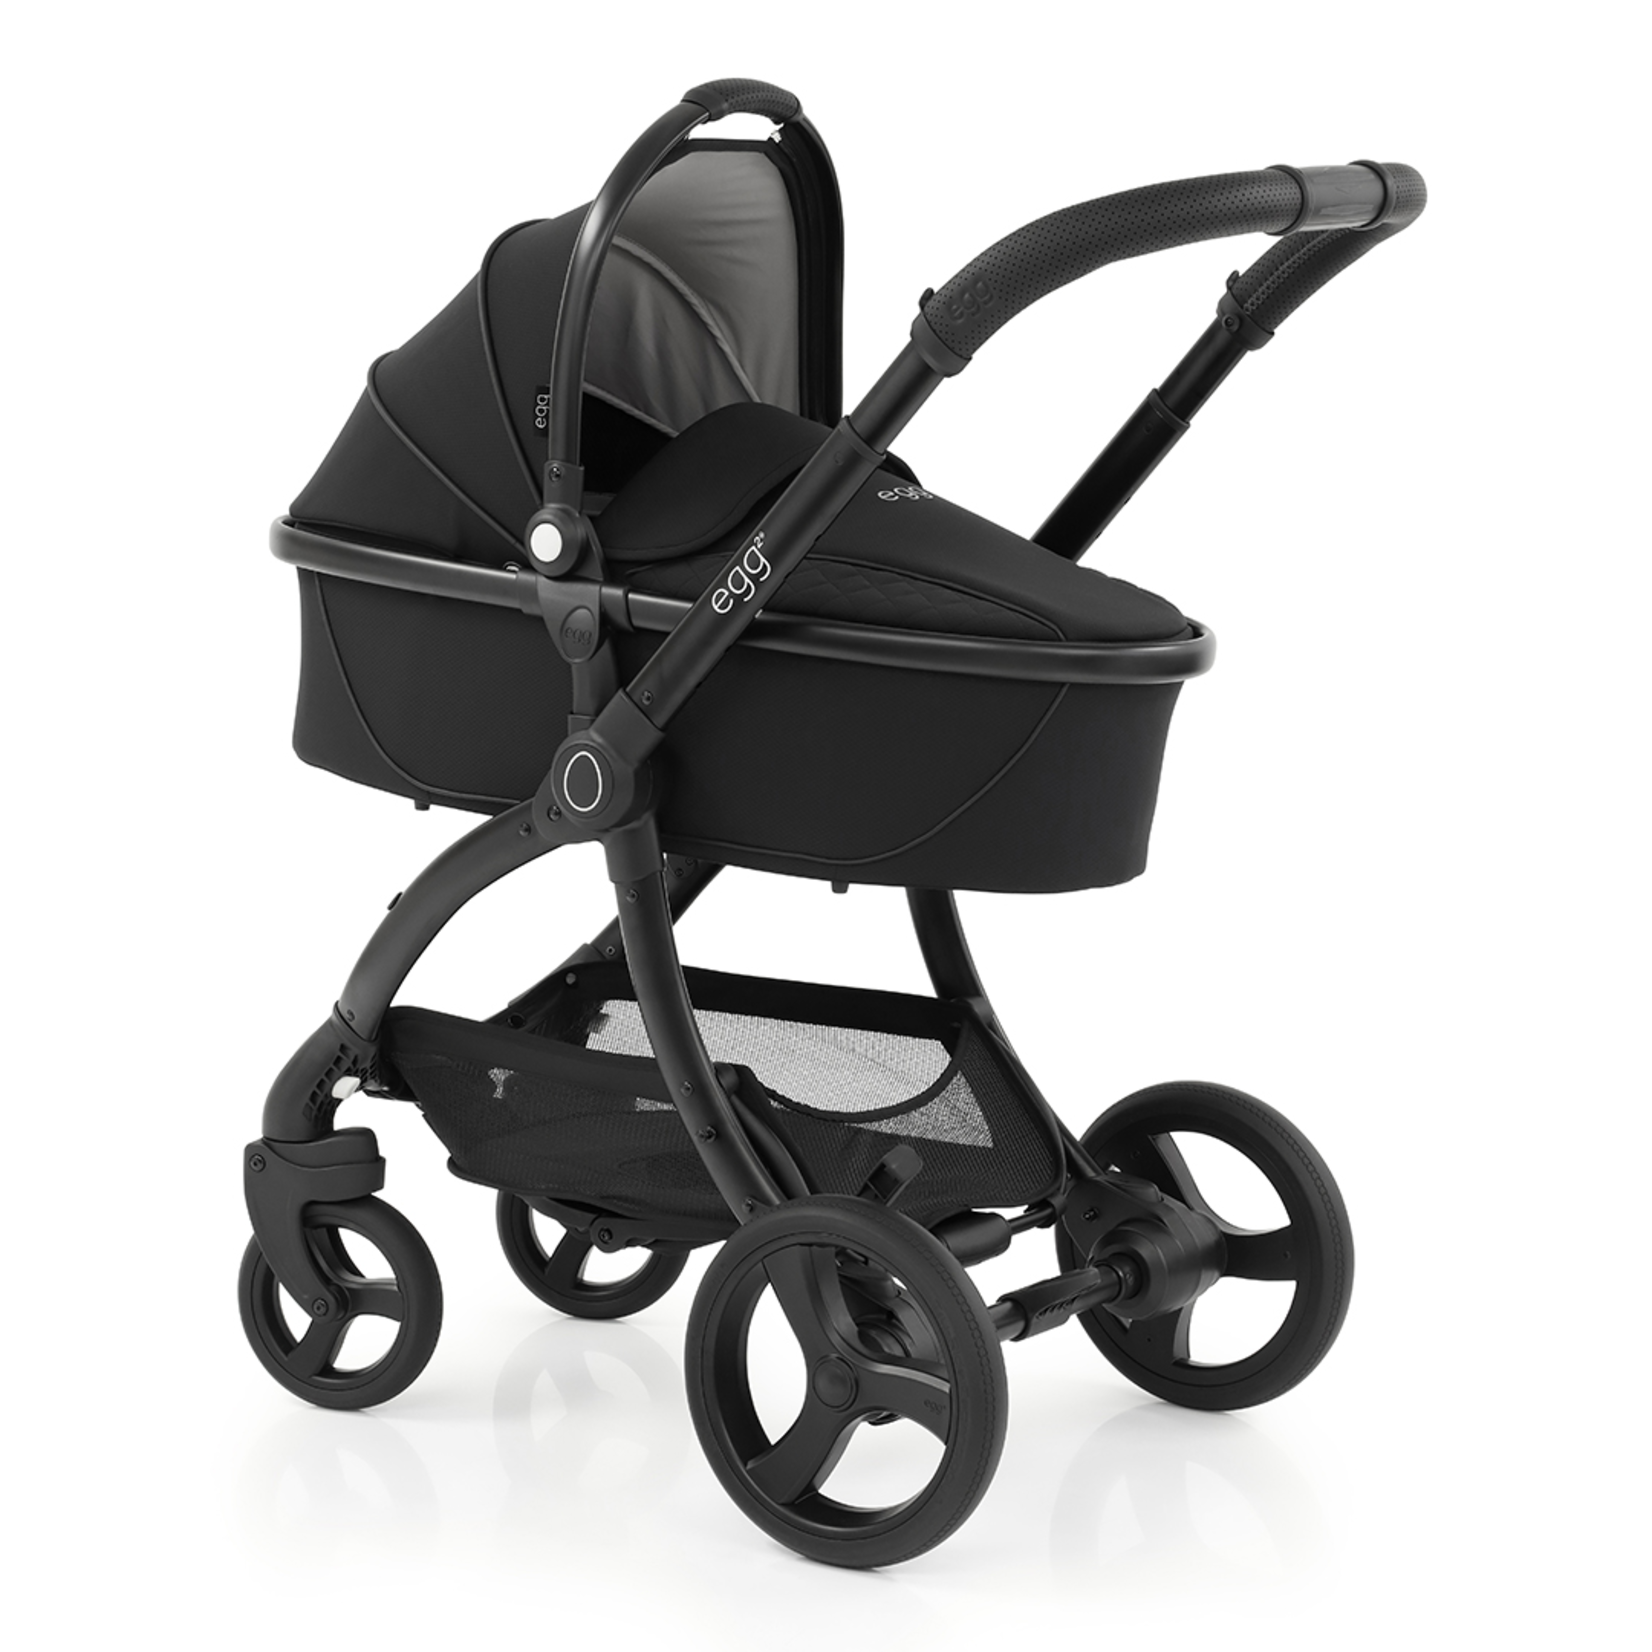 EGG EGG 2 ( 2 IN 1 ) CARRY COT TRAVEL SYSTEM - JUST BLACK ( SPECIAL EDITION)